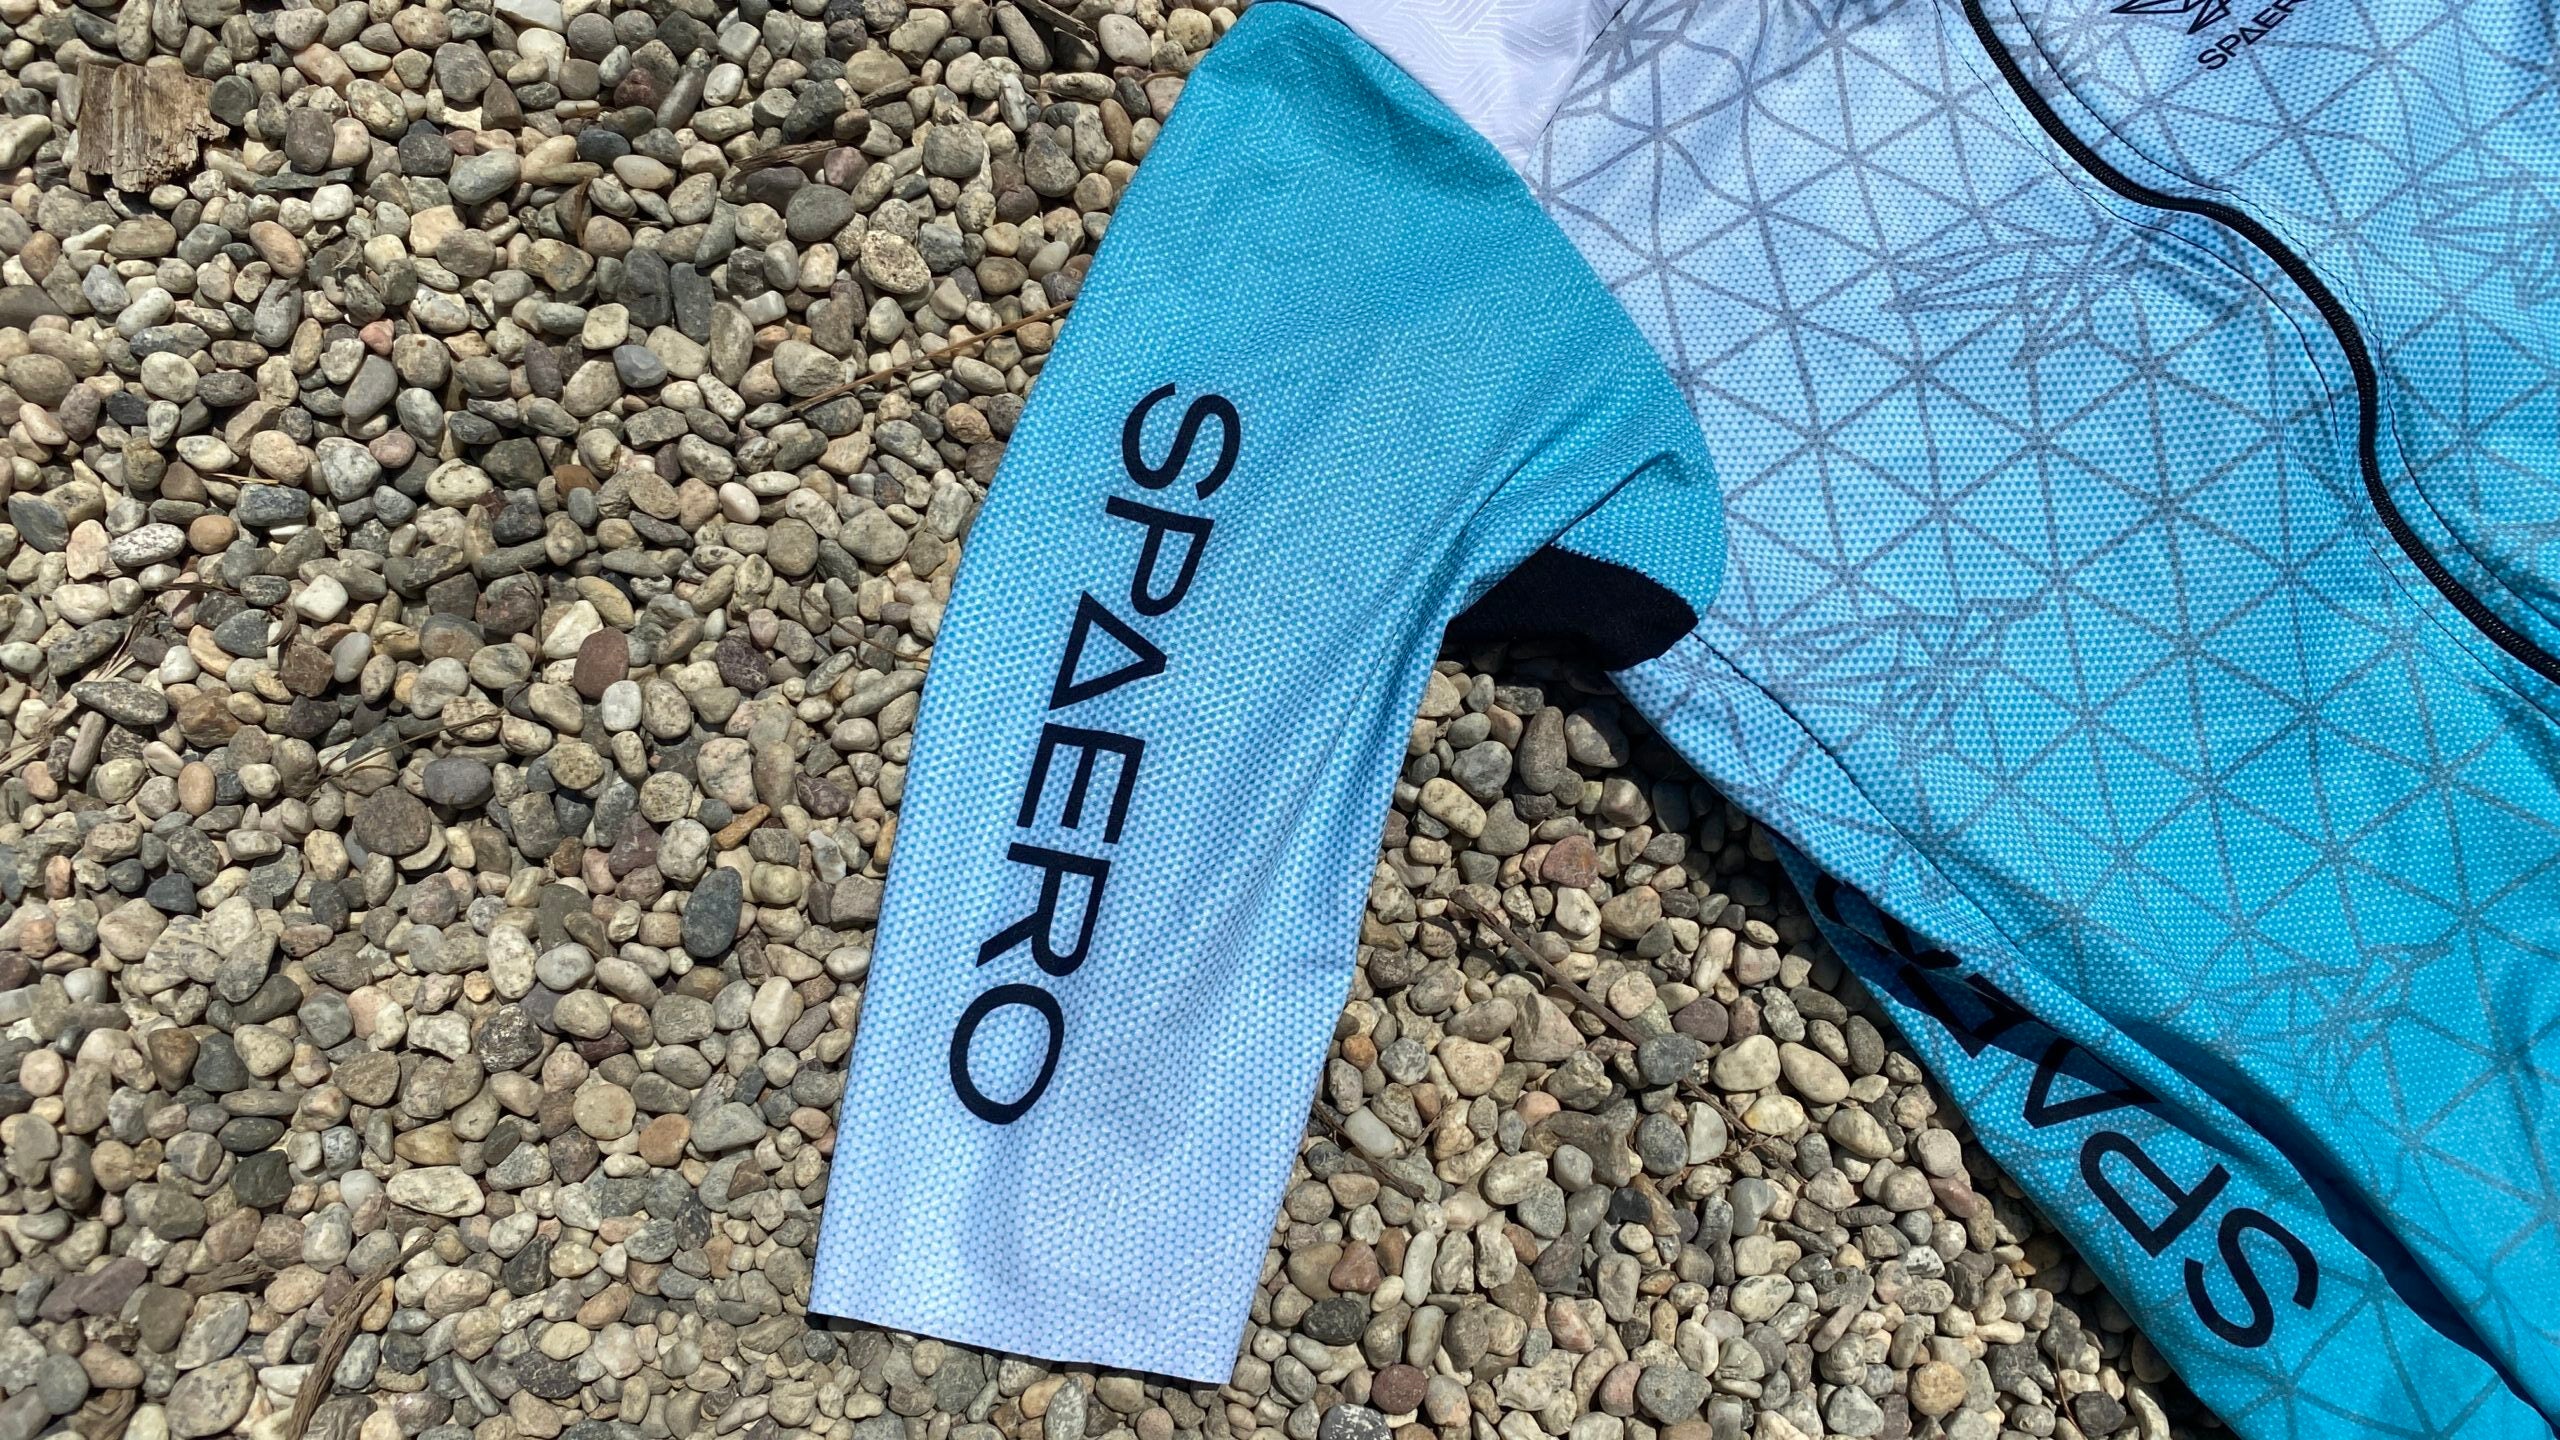 The arms of the Spaero SP1 tri suit reviewed